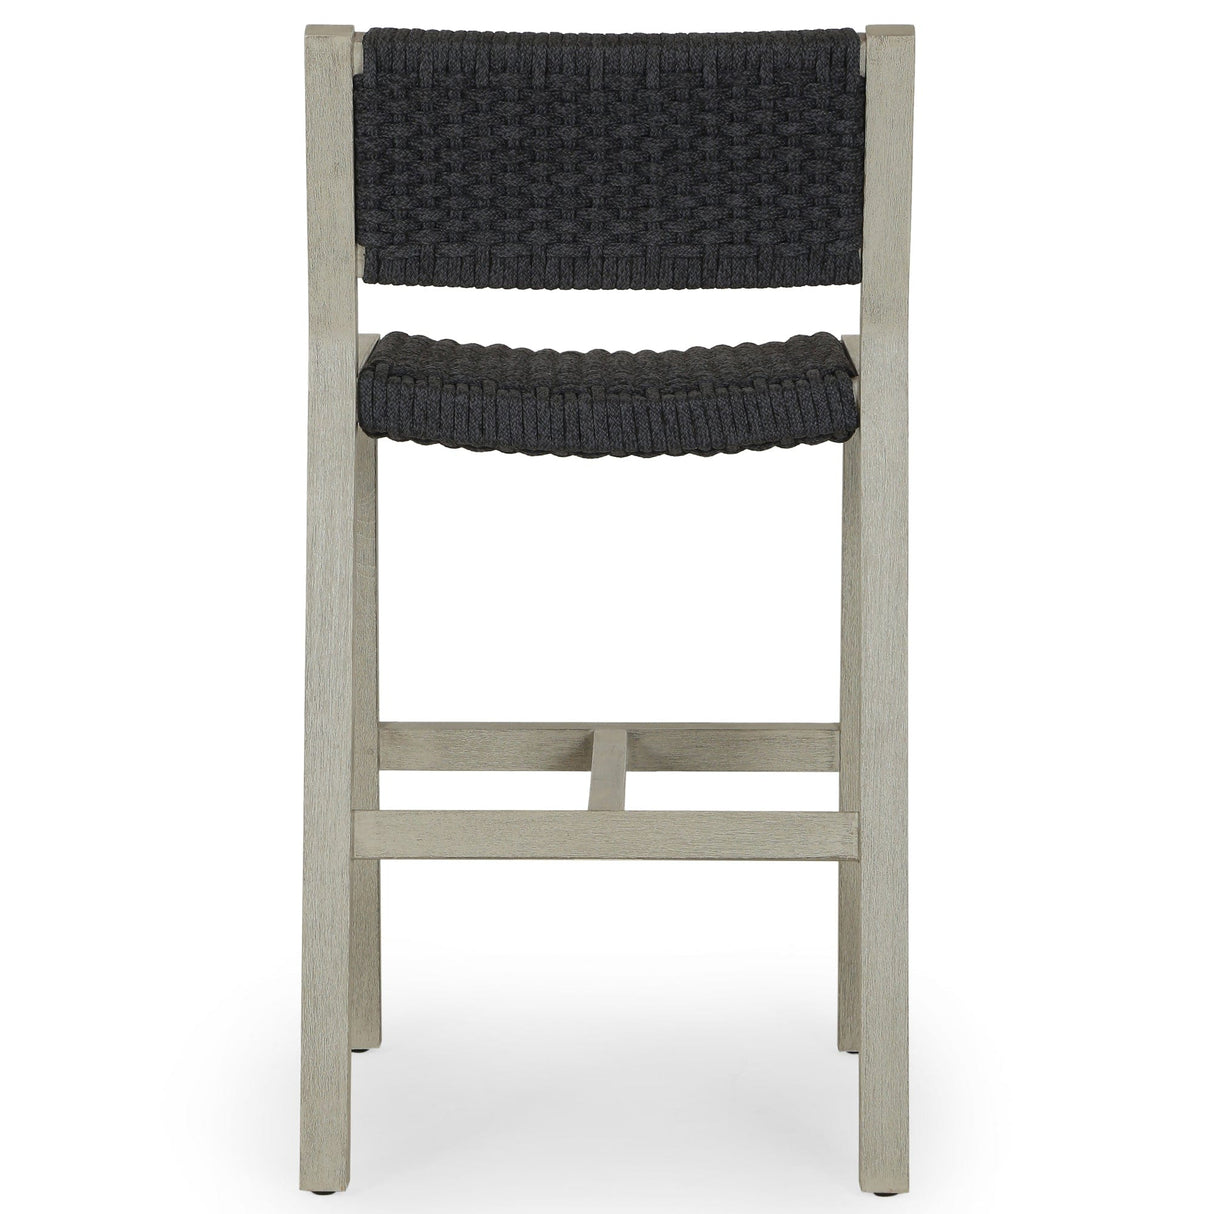 Four Hands Delano Outdoor Bar & Counter Stool Furniture